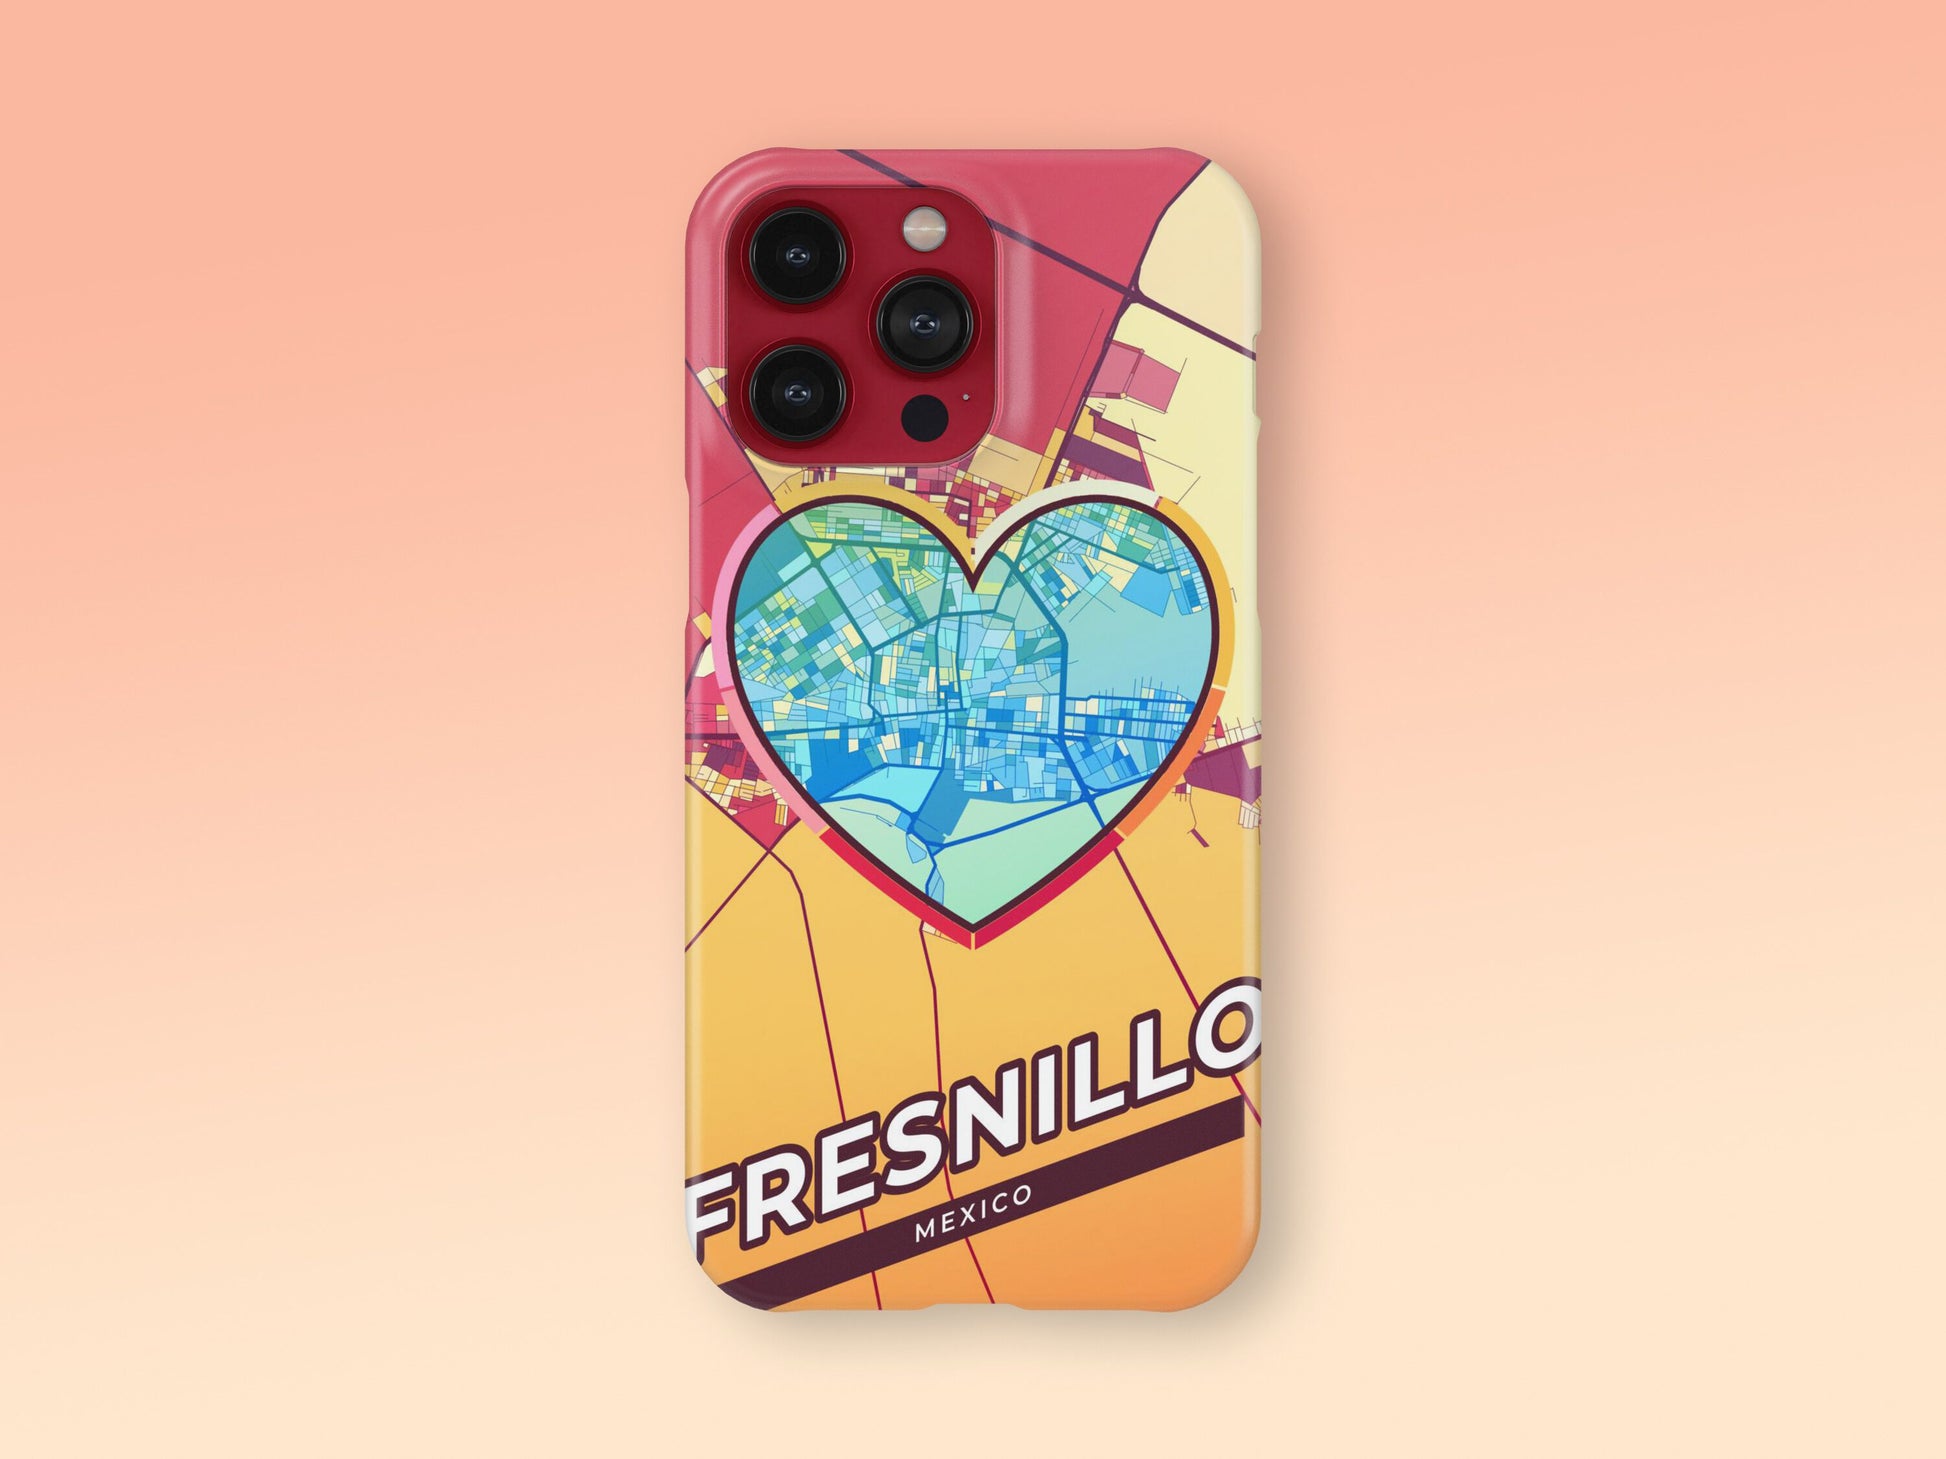 Fresnillo Mexico slim phone case with colorful icon. Birthday, wedding or housewarming gift. Couple match cases. 2